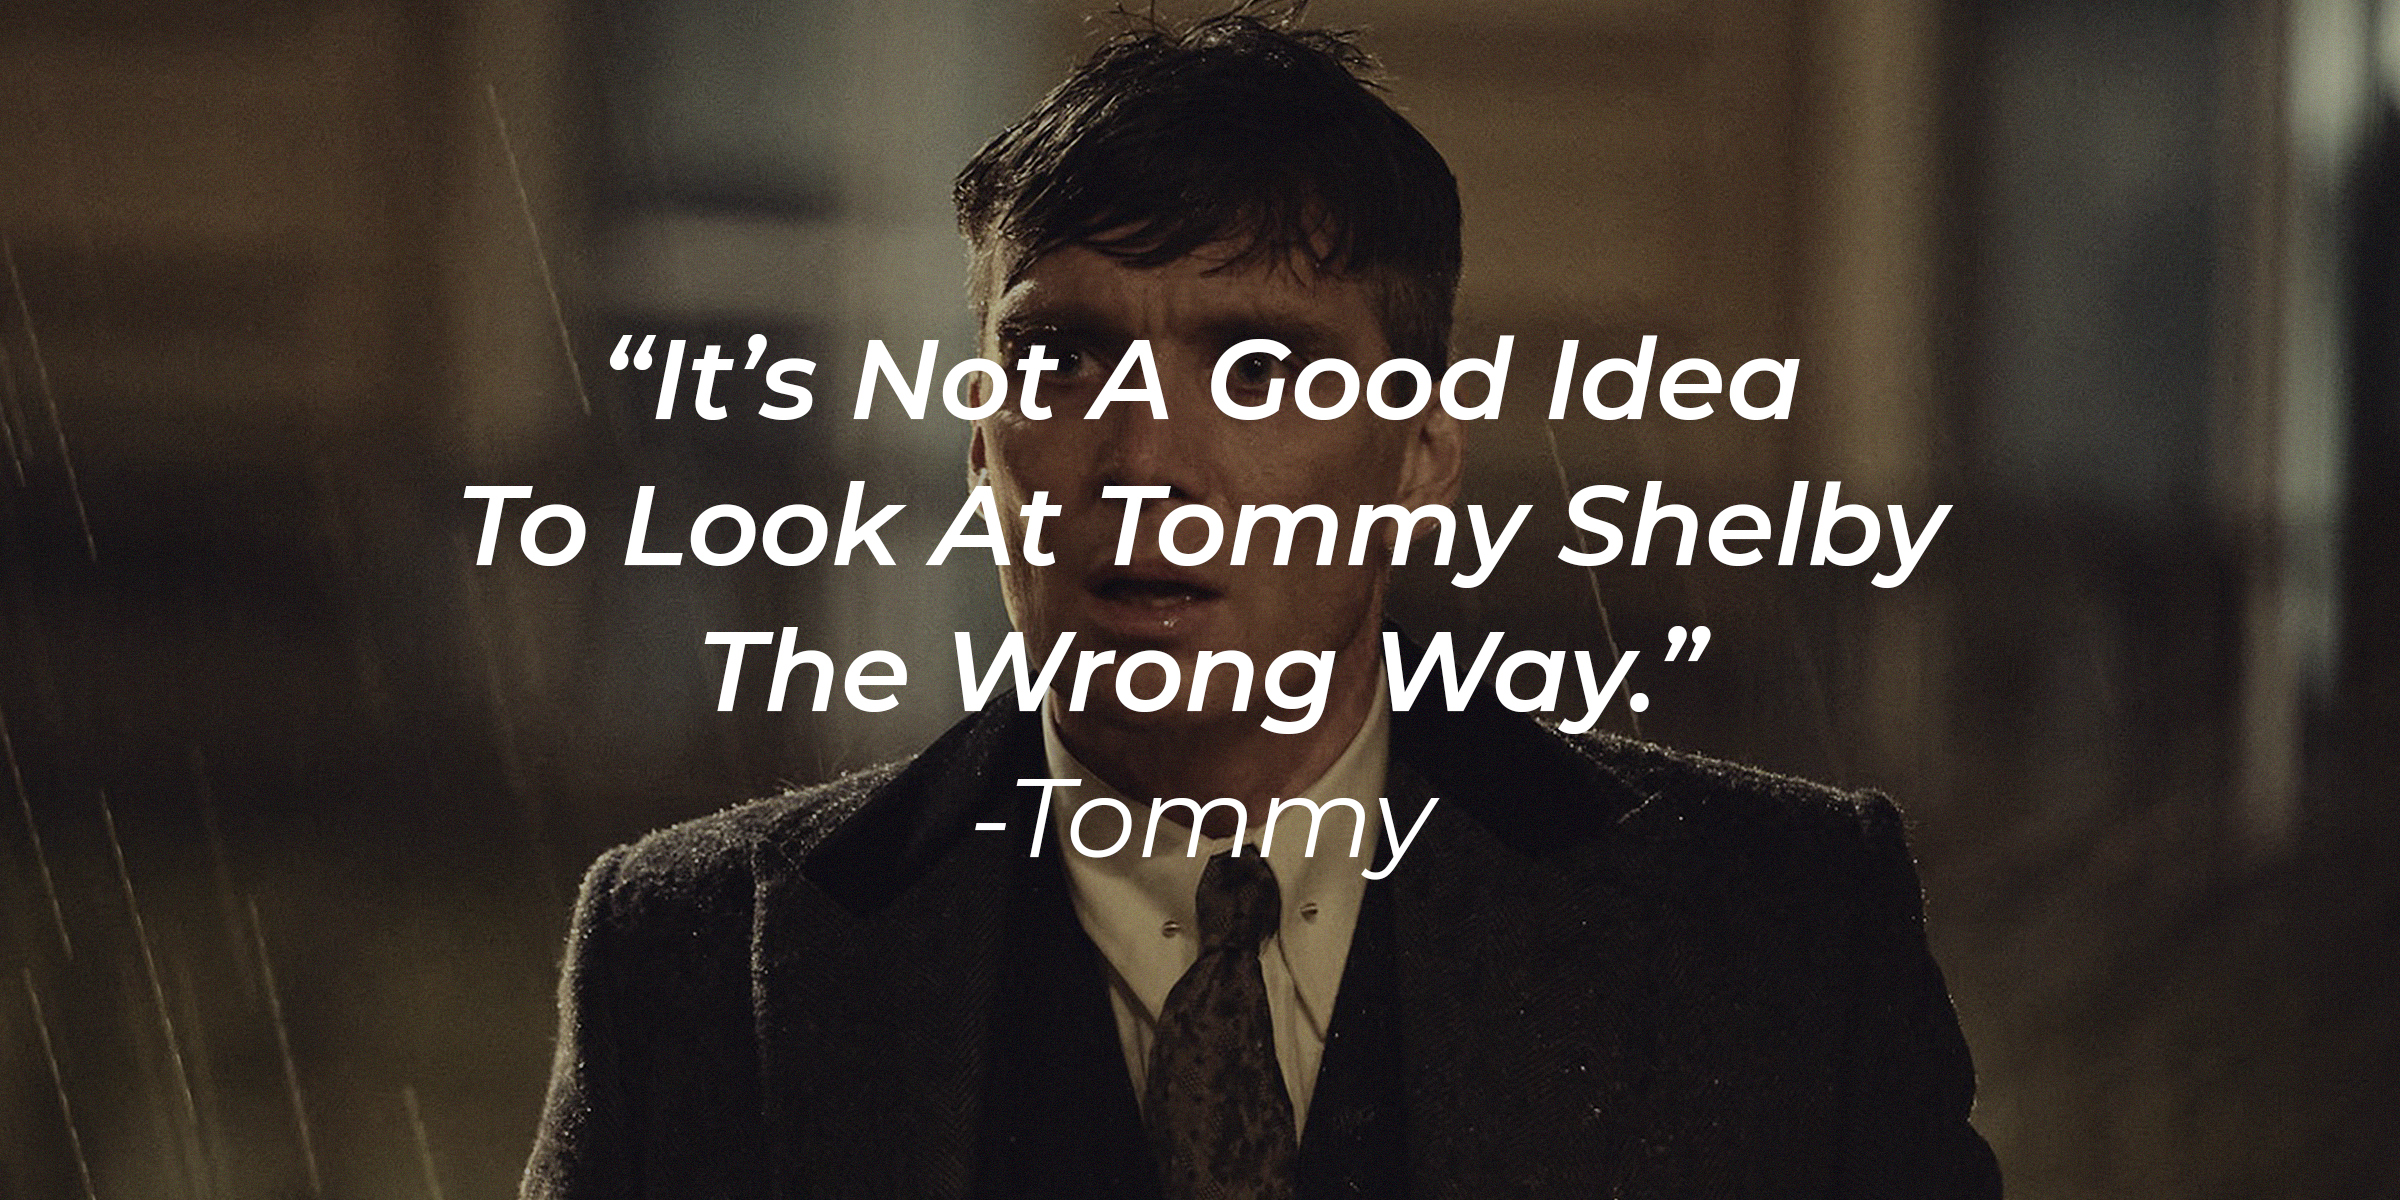 Tommy with his quote: "It's Not A Good Idea To Look At Tommy Shelby The Wrong Way." | Source: facebook.com/PeakyBlinders